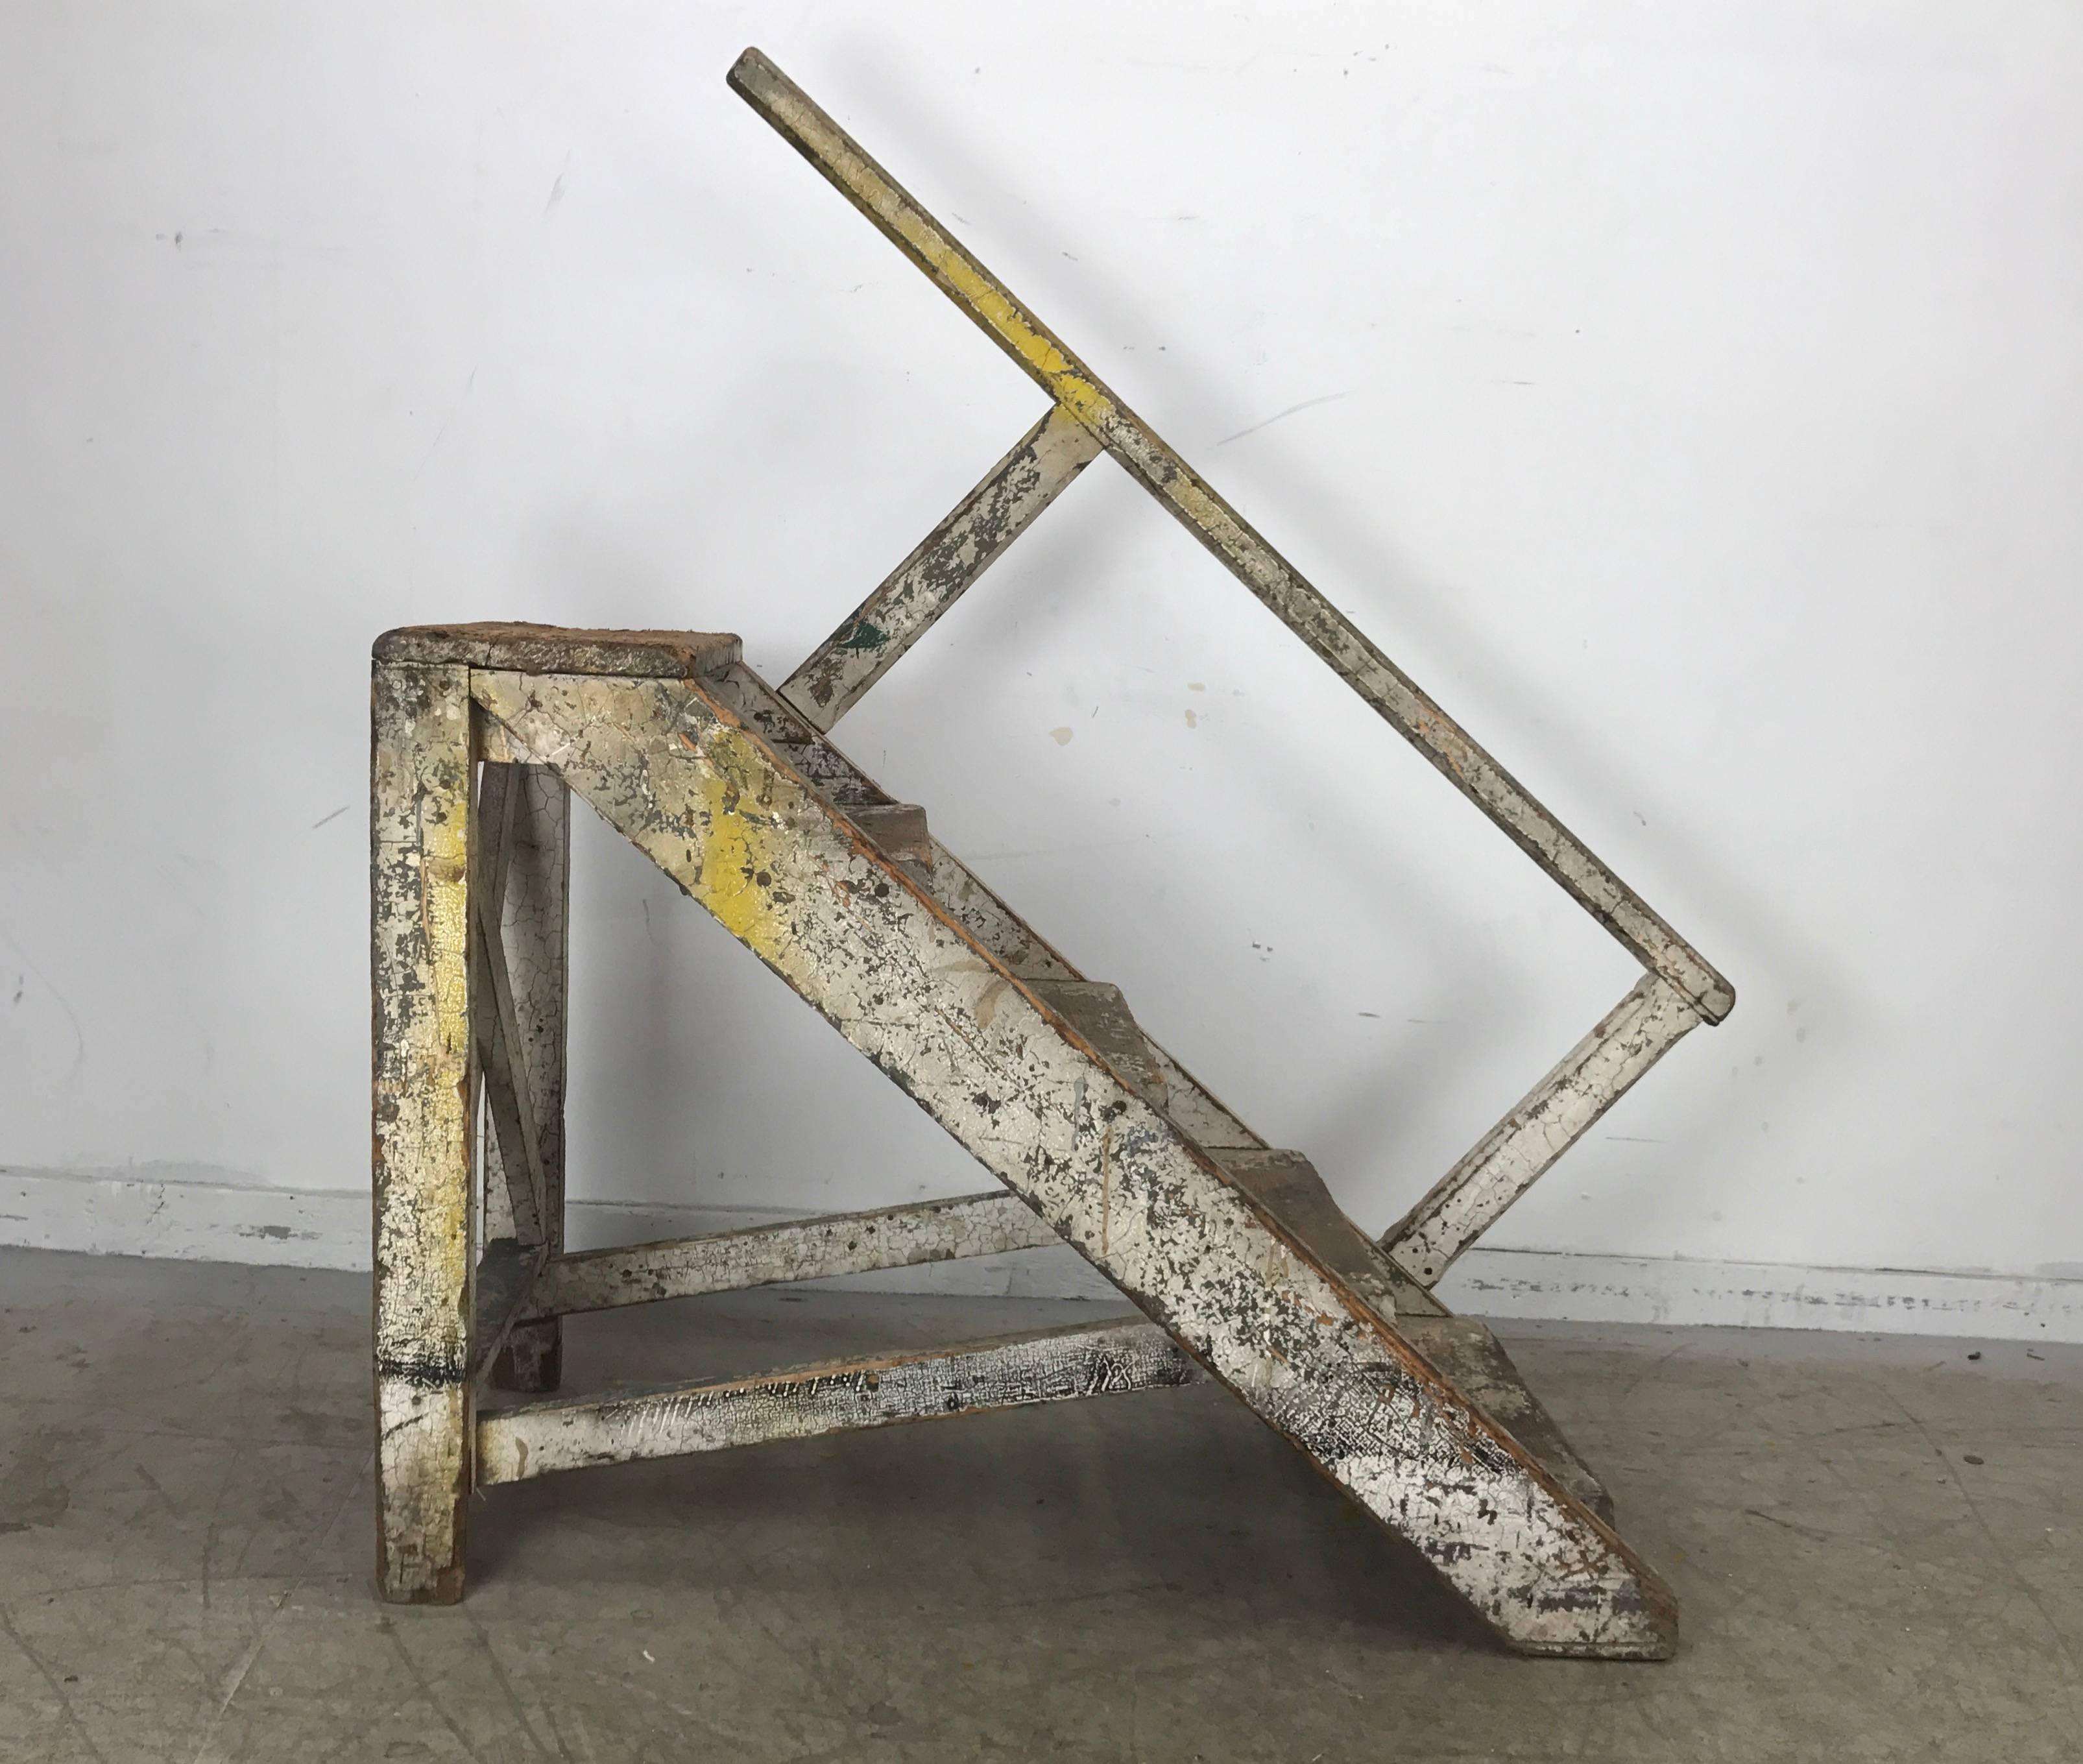 Antique, late 1800s Factory Steps or Platform Ladder with beveled railing, Amazing patina. color and surface, Well built, sturdy. Hand delivery avail to New York City or anywhere en route from Buffalo New York.